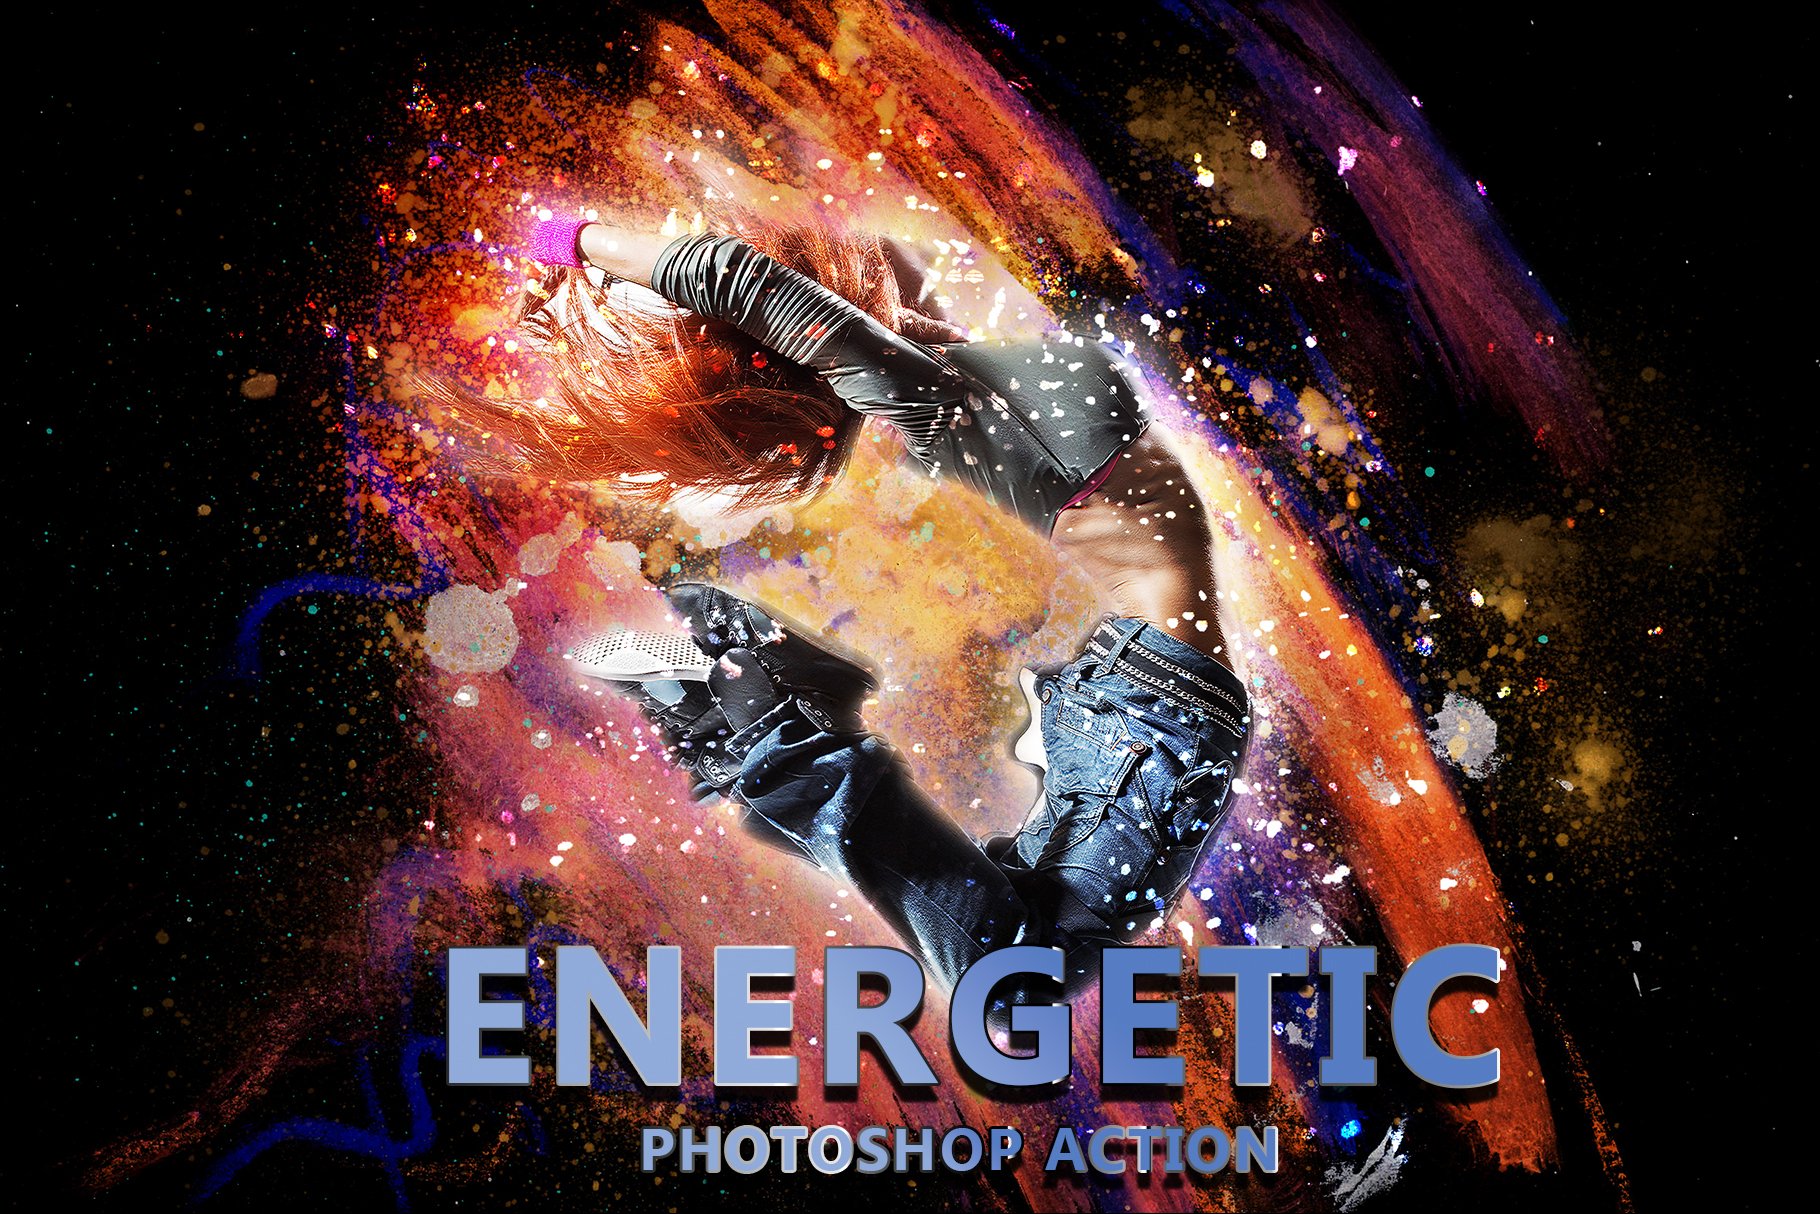 Energetic Photoshop Actioncover image.